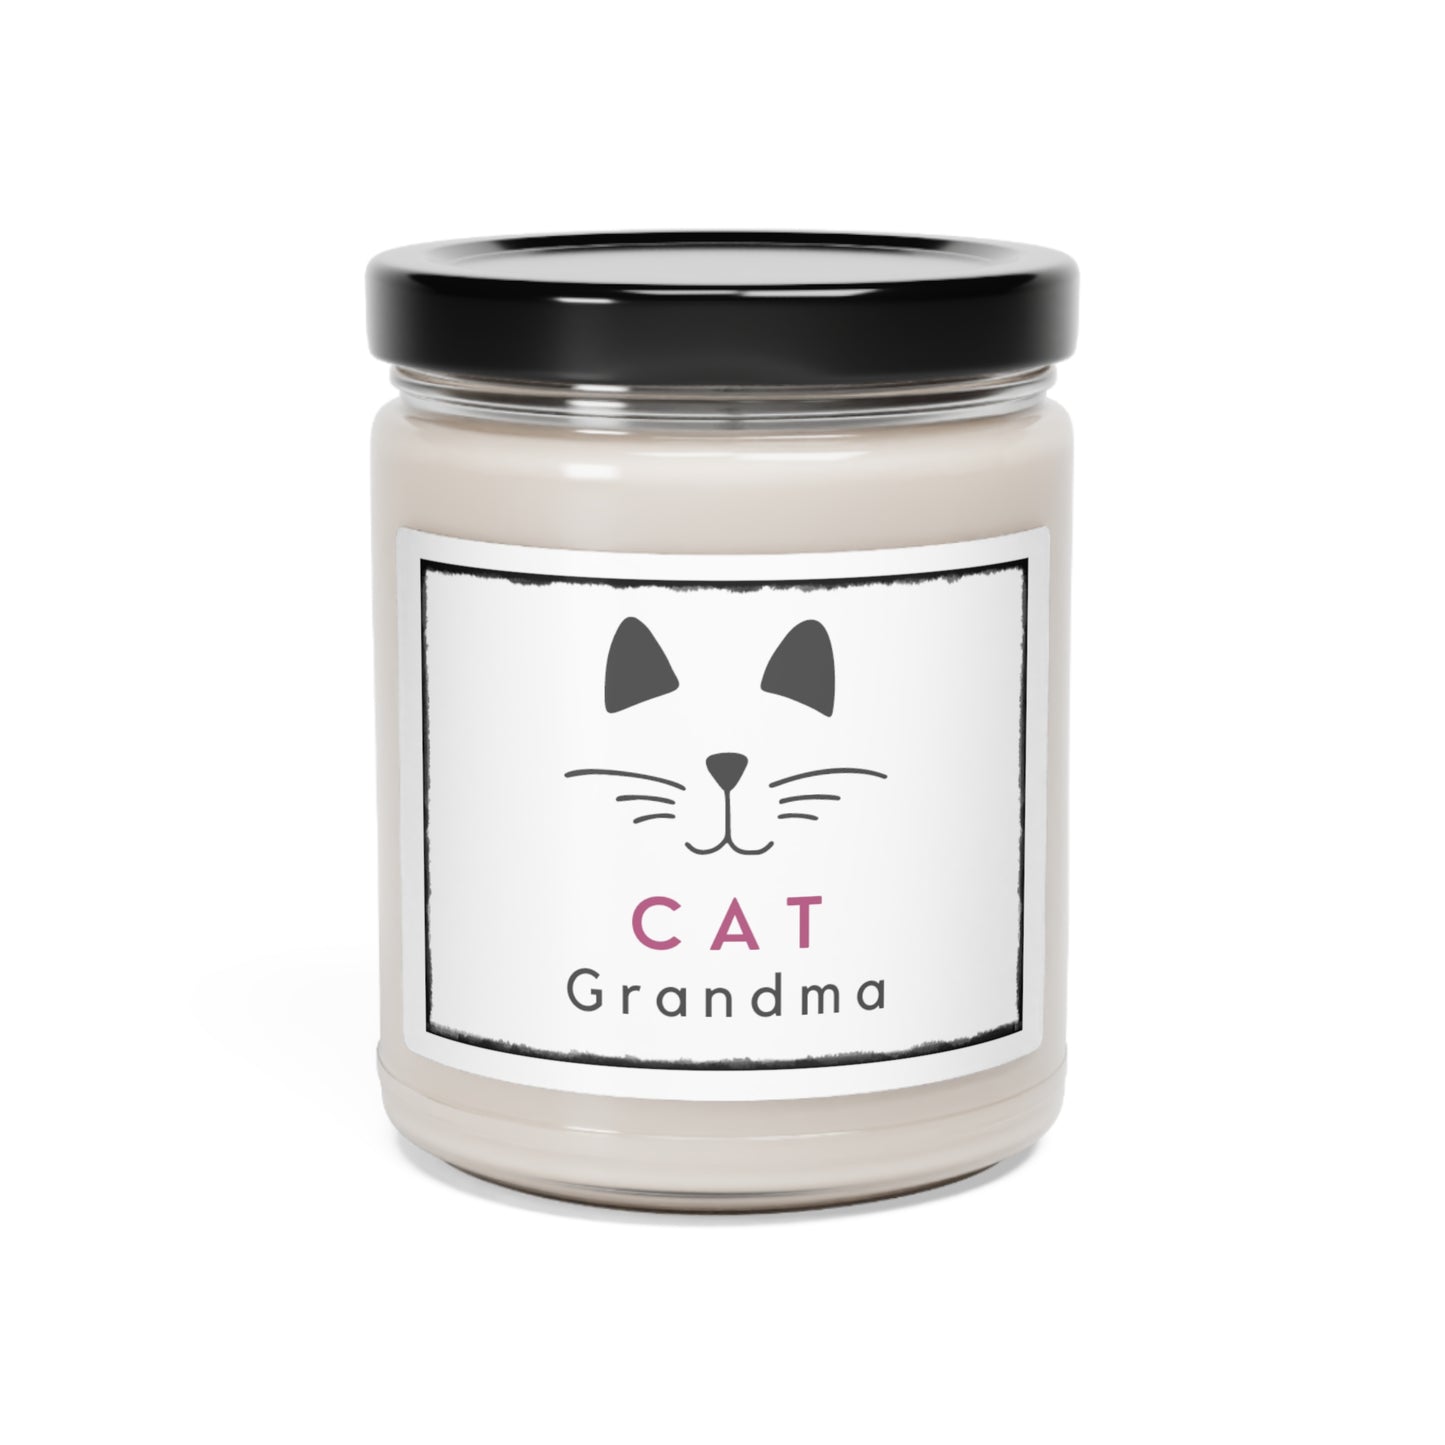 Cat Grandma Scented Soy Candle